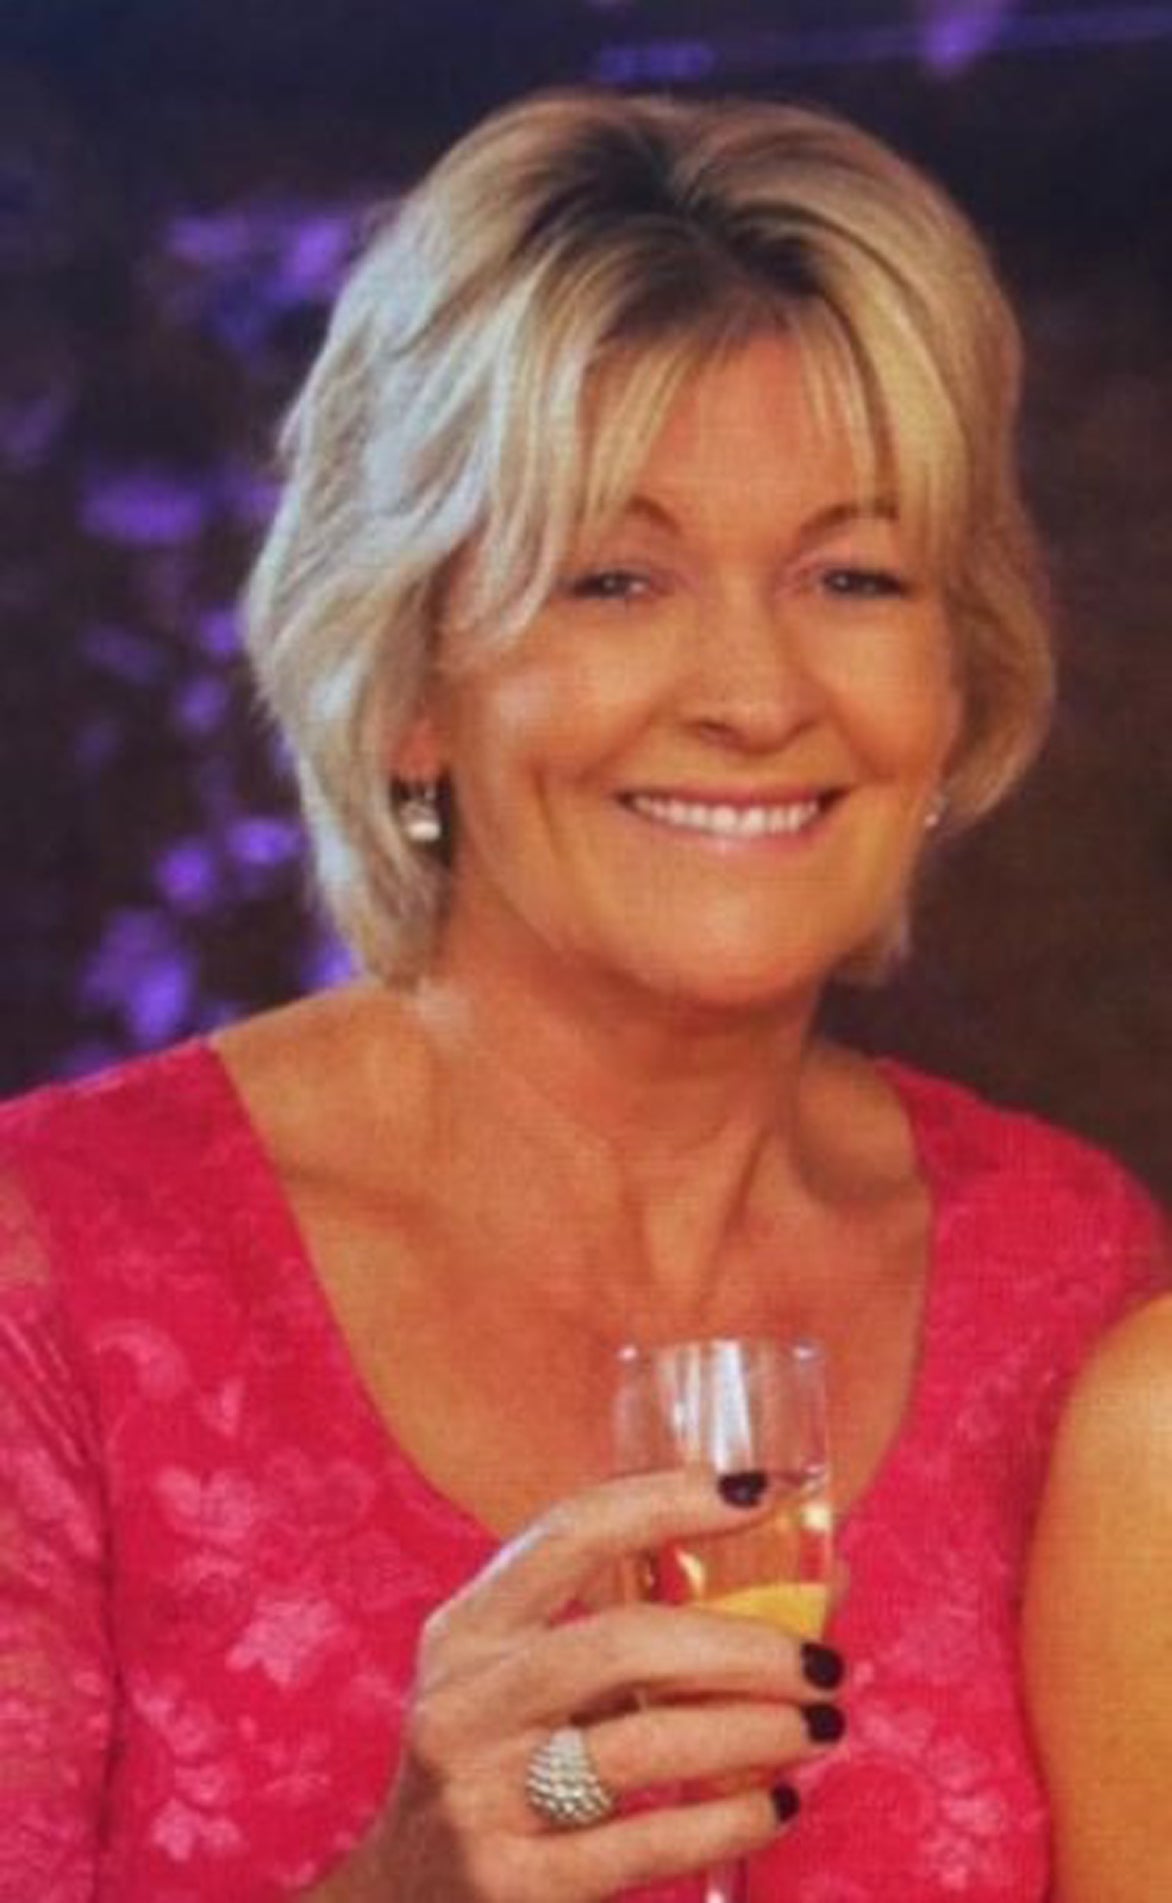 Wendy Taylor, 57, has been confirmed to have passed away as a result Storm Babet